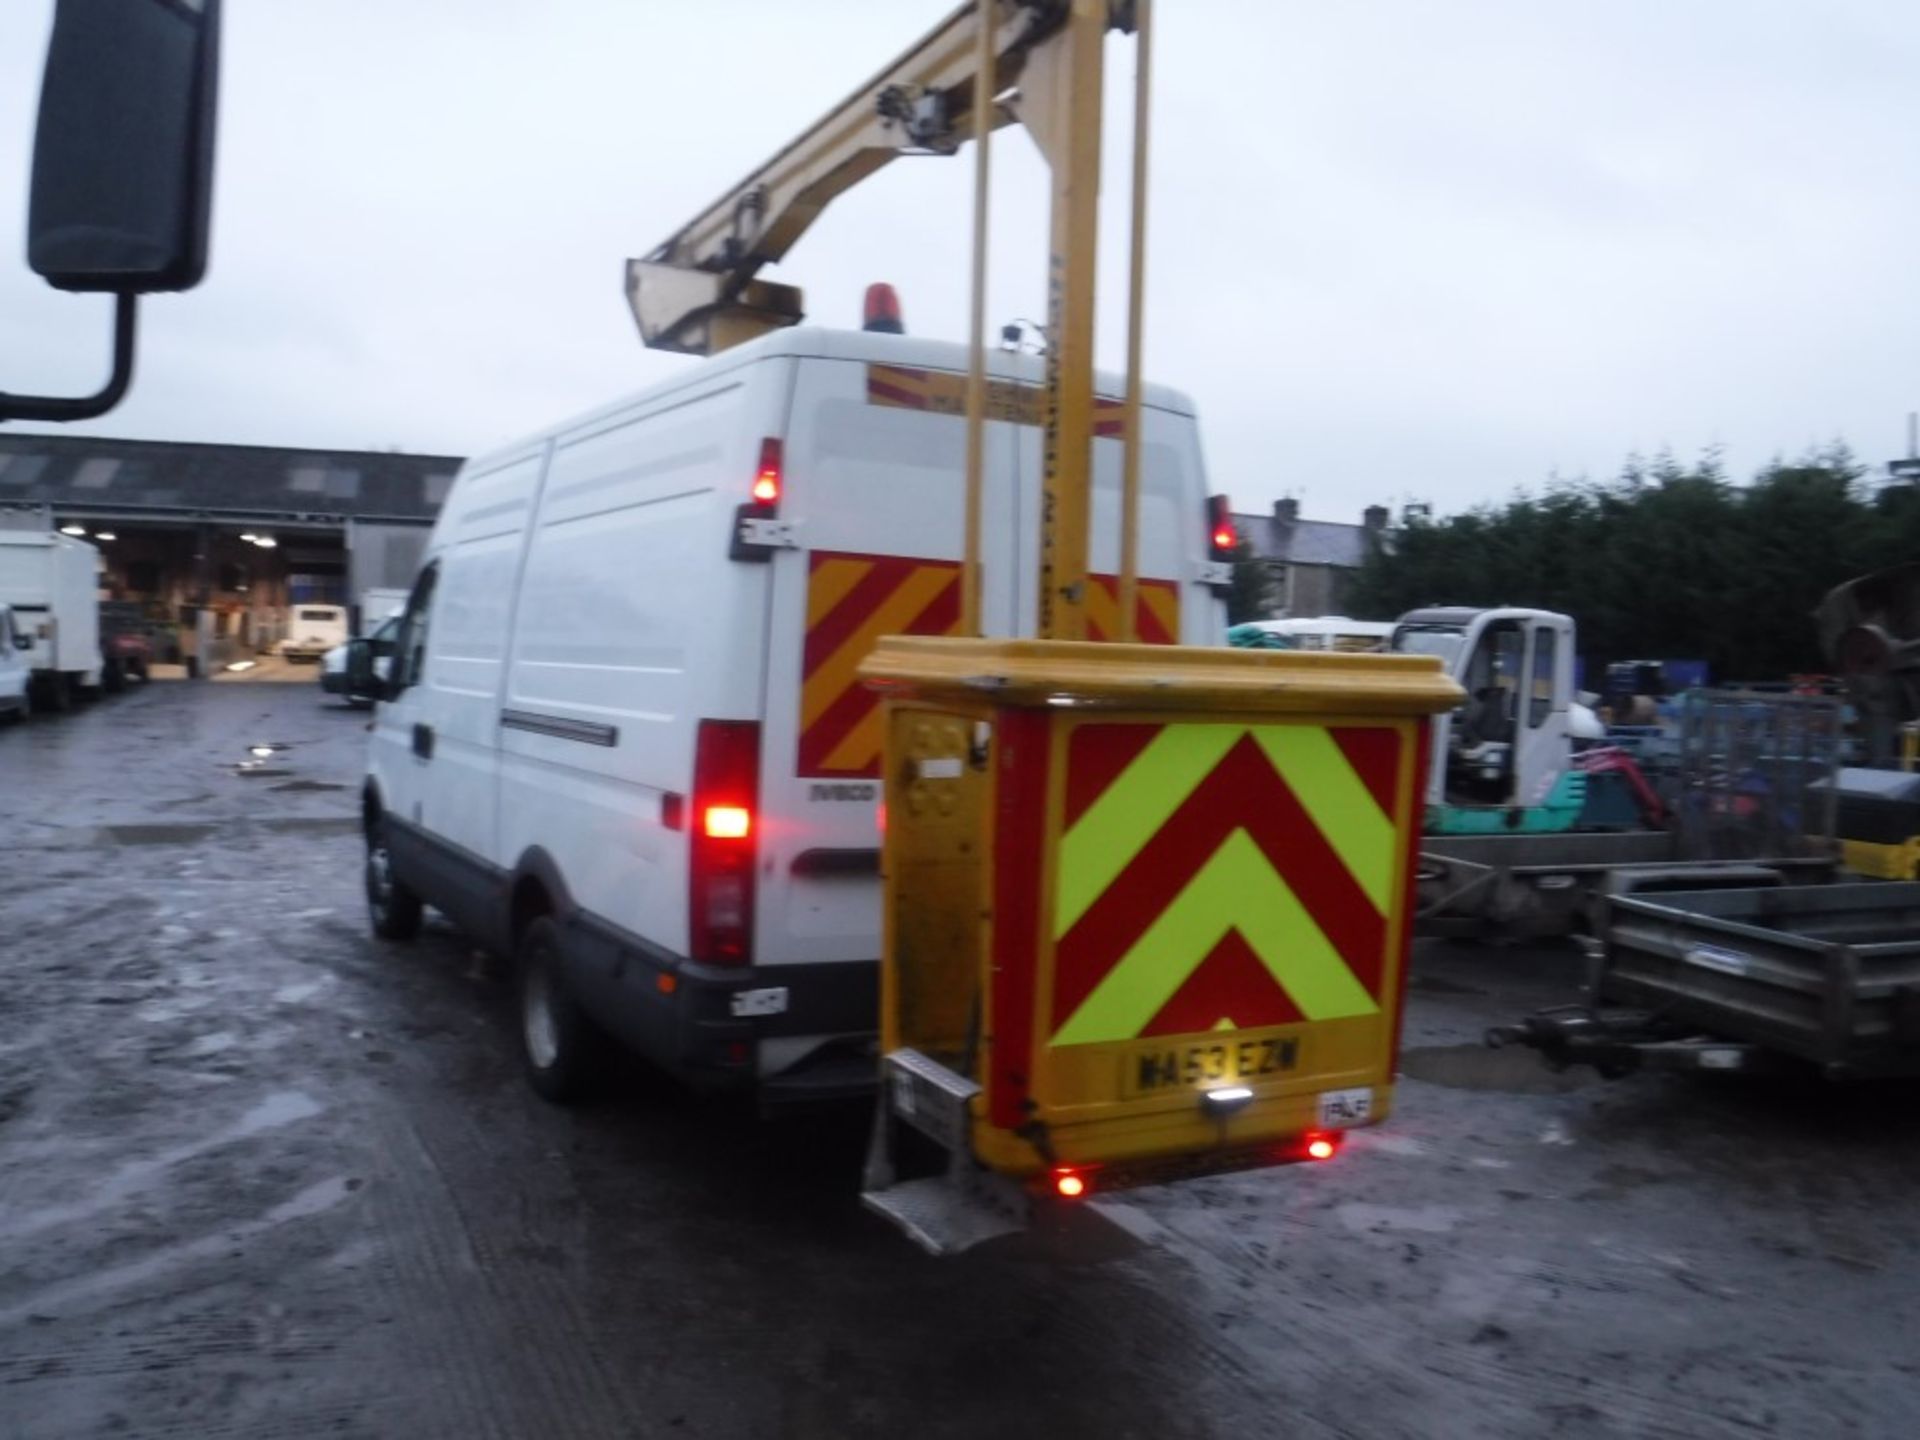 53 reg IVECO DAILY 50C13 CHERRY PICKER, 1ST REG 09/03, 198270KM WARRANTED, V5 HERE, 1 FORMER - Image 3 of 5